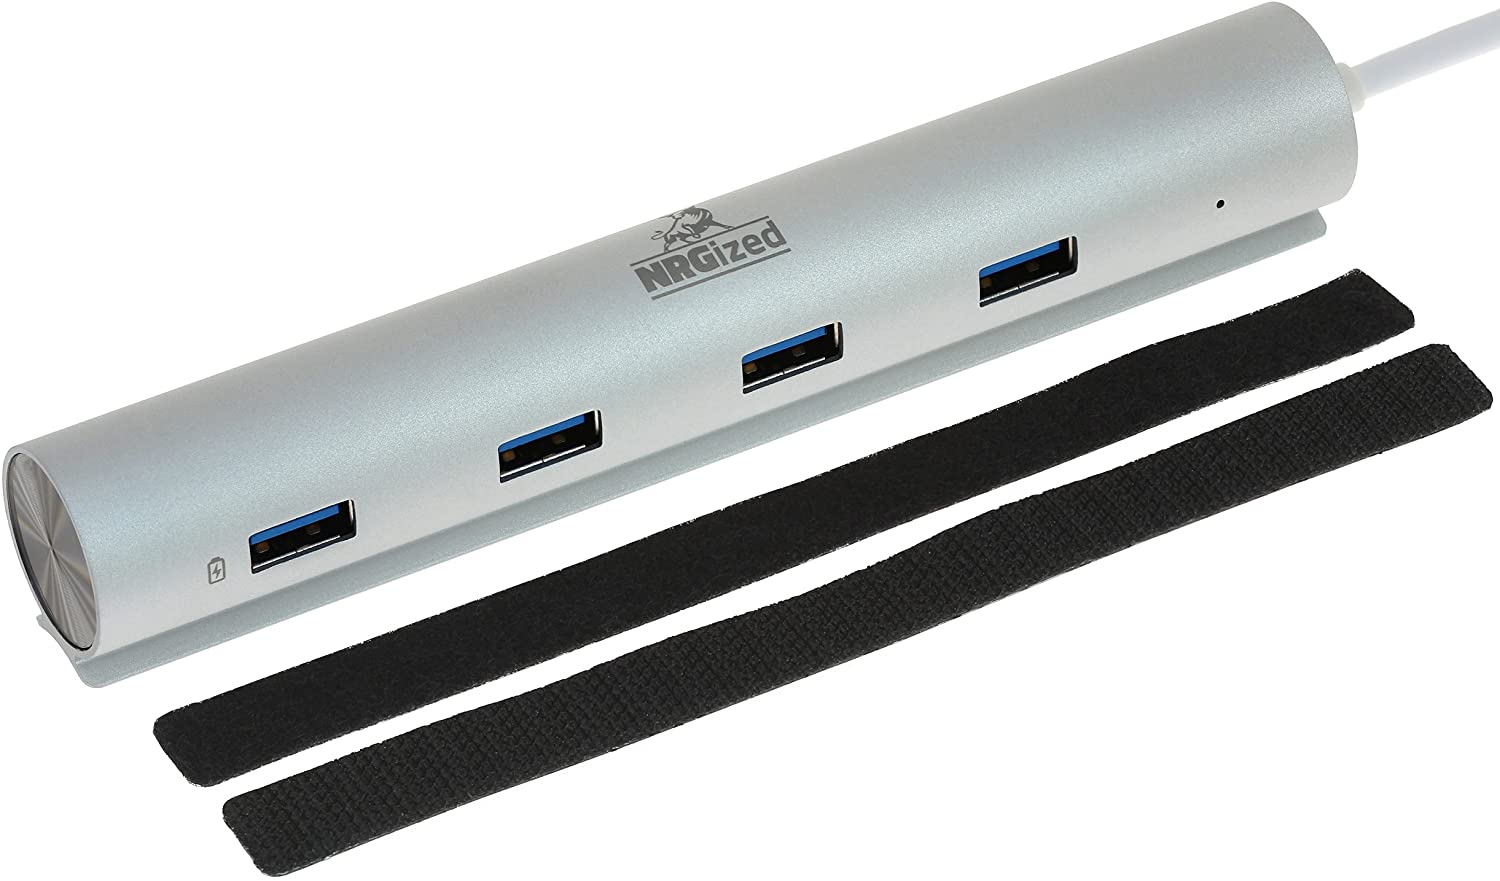 Type C USB-C Hub (NOT STANDARD USB) NRGized C500 USB-C to 7-Port USB 3.0 Hub for USB Type-C Devices (works the new MacBook (12 inch, 2015), ChromeBook Pixel, and Other Devices) - image 4 of 5